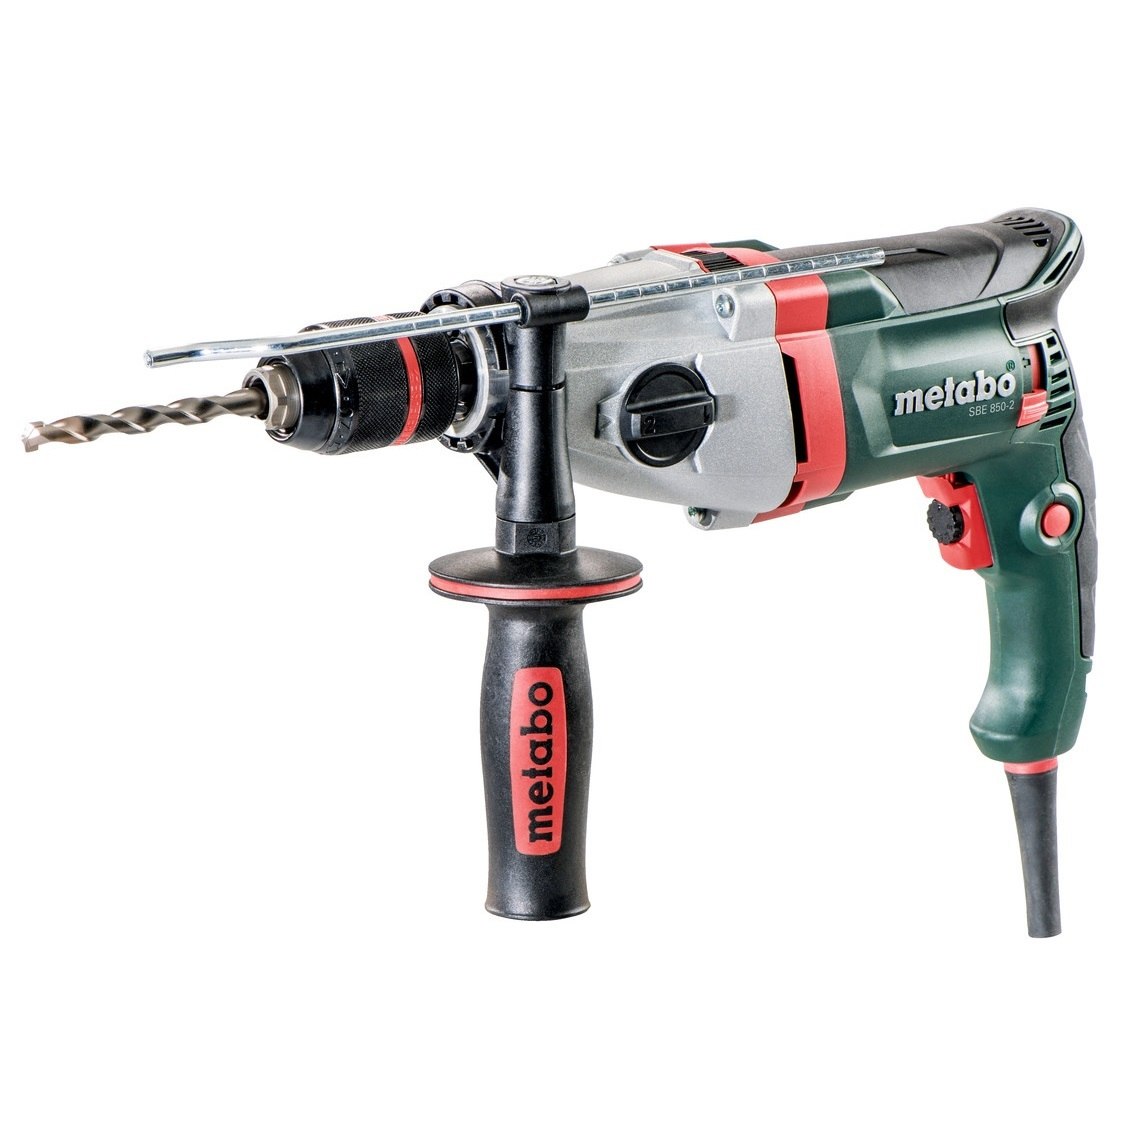 850W Impact Drill Driver SBE850-2 by Metabo